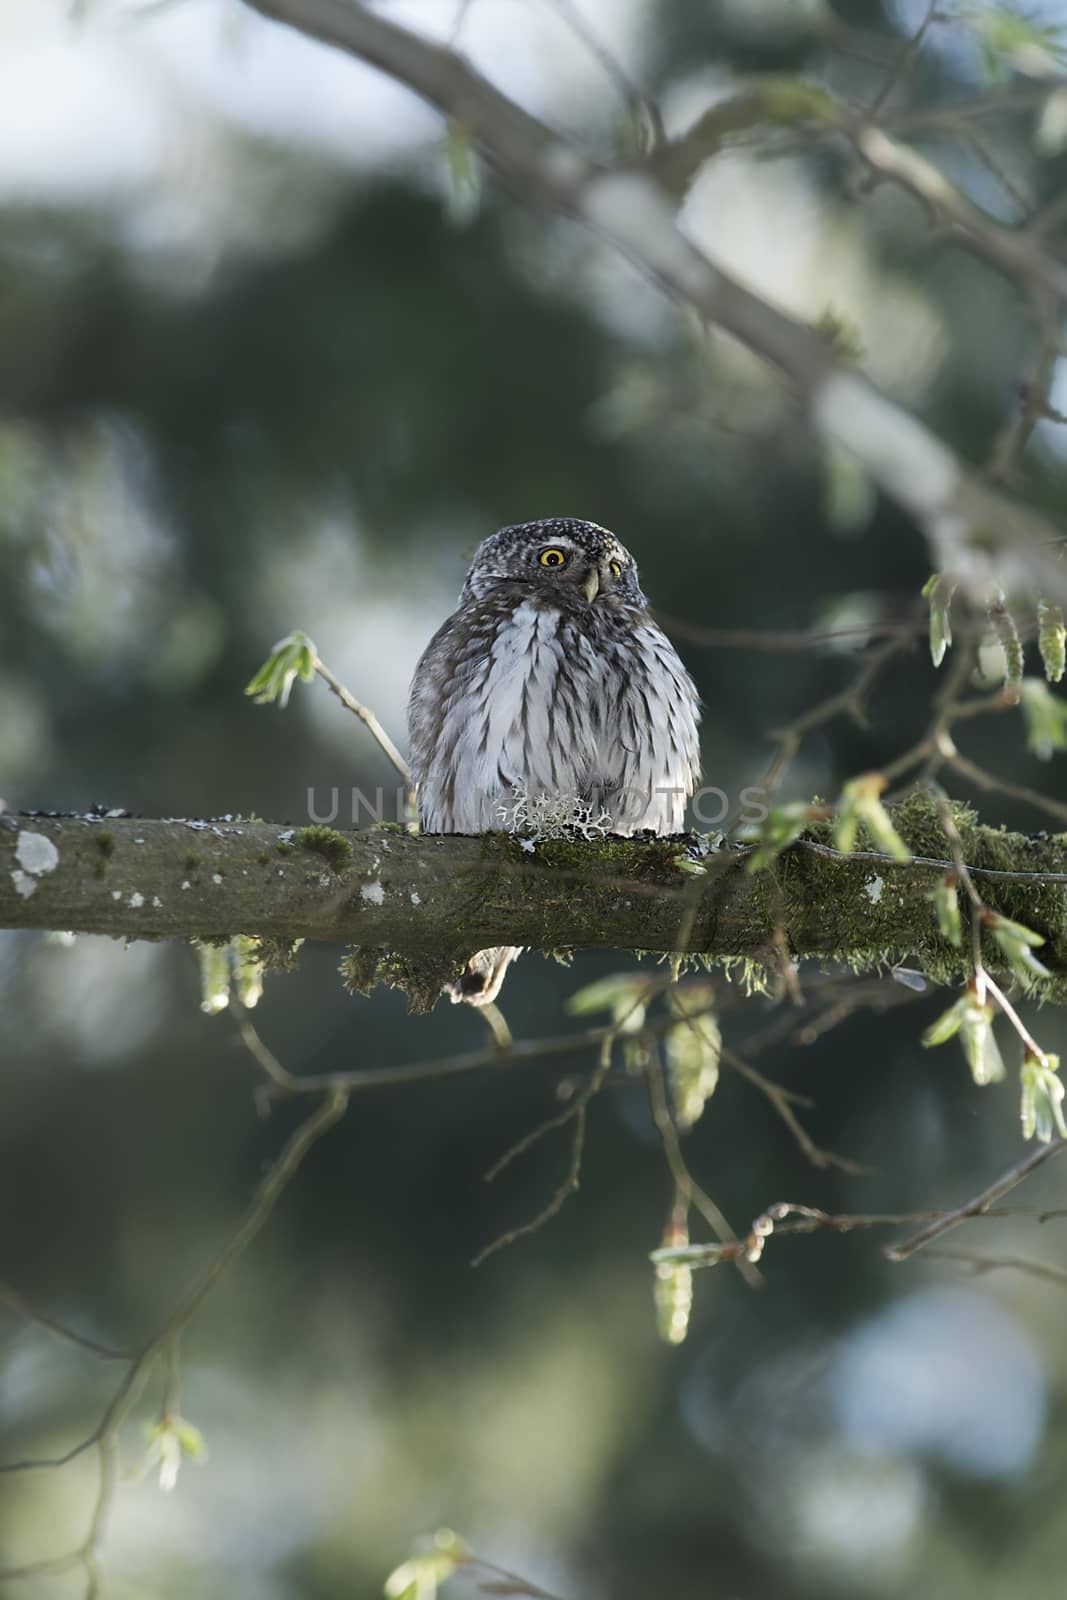 Cute Pygme owl in super green forest surroundings, Bialowieza, Poland